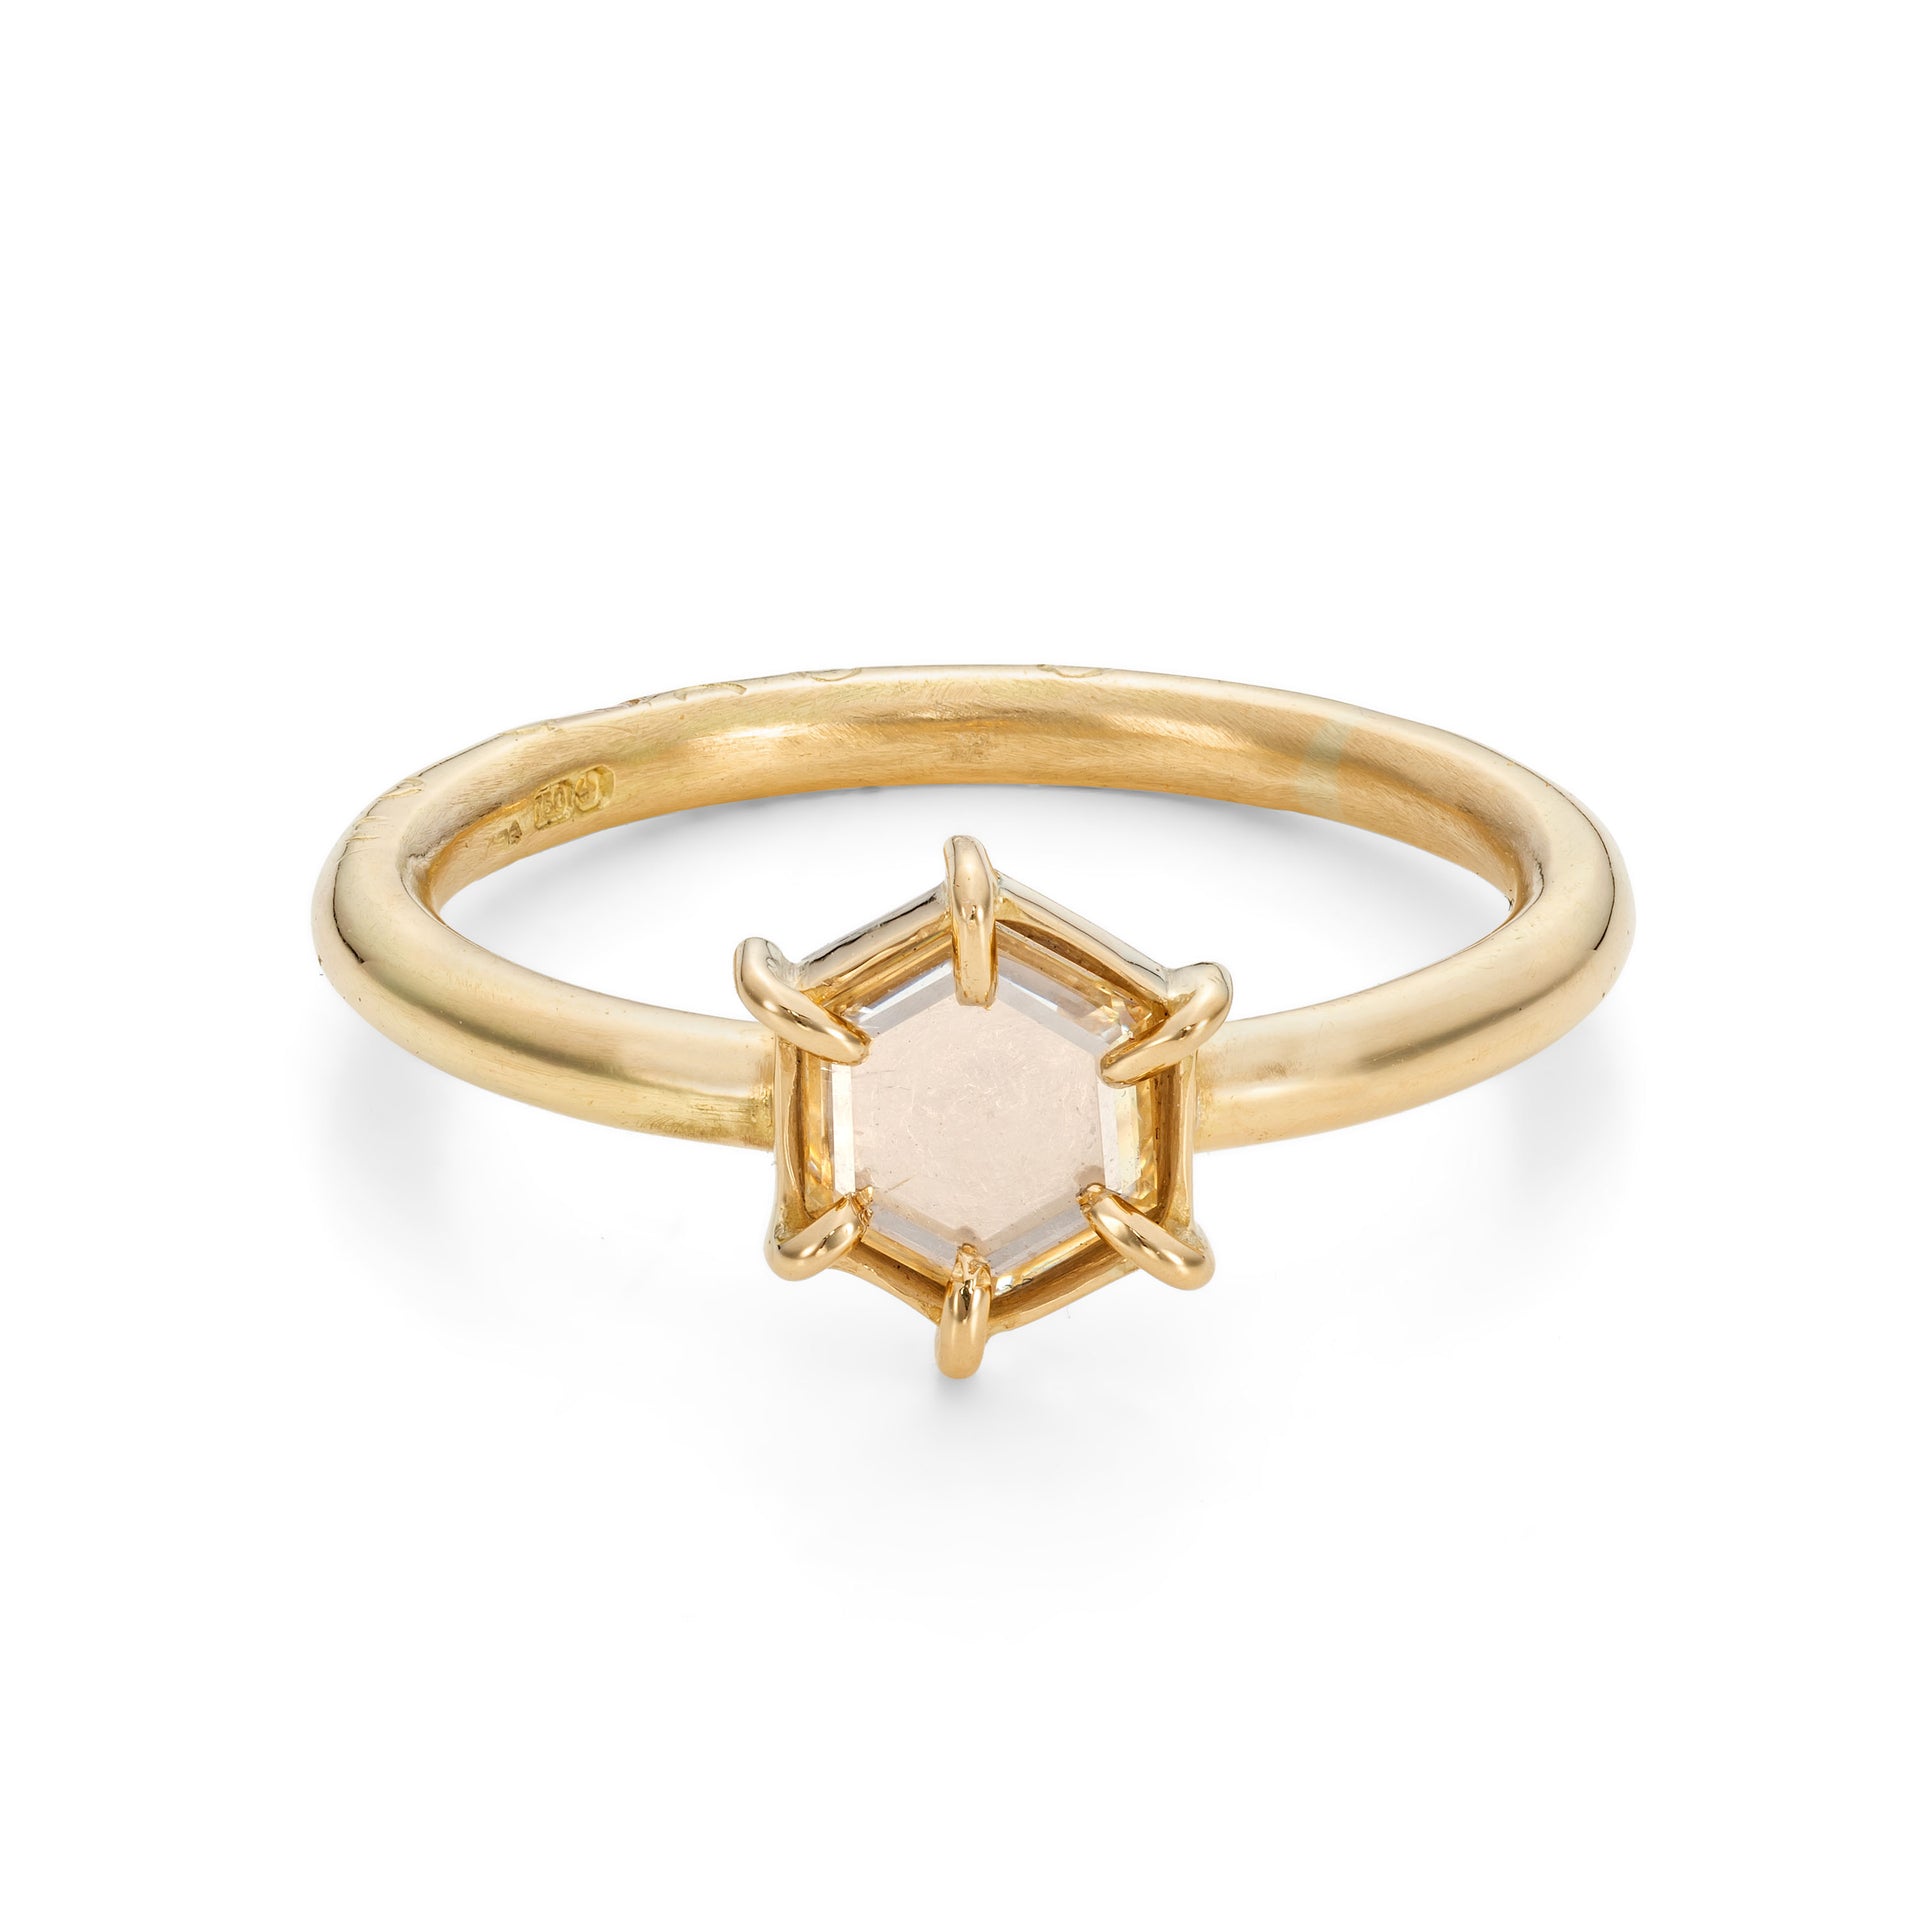 Starry Night diamond solitaire ring in 18ct recycled gold. Engagement ring one of a kind hexagon diamond ring by Corrinne Eira Evans